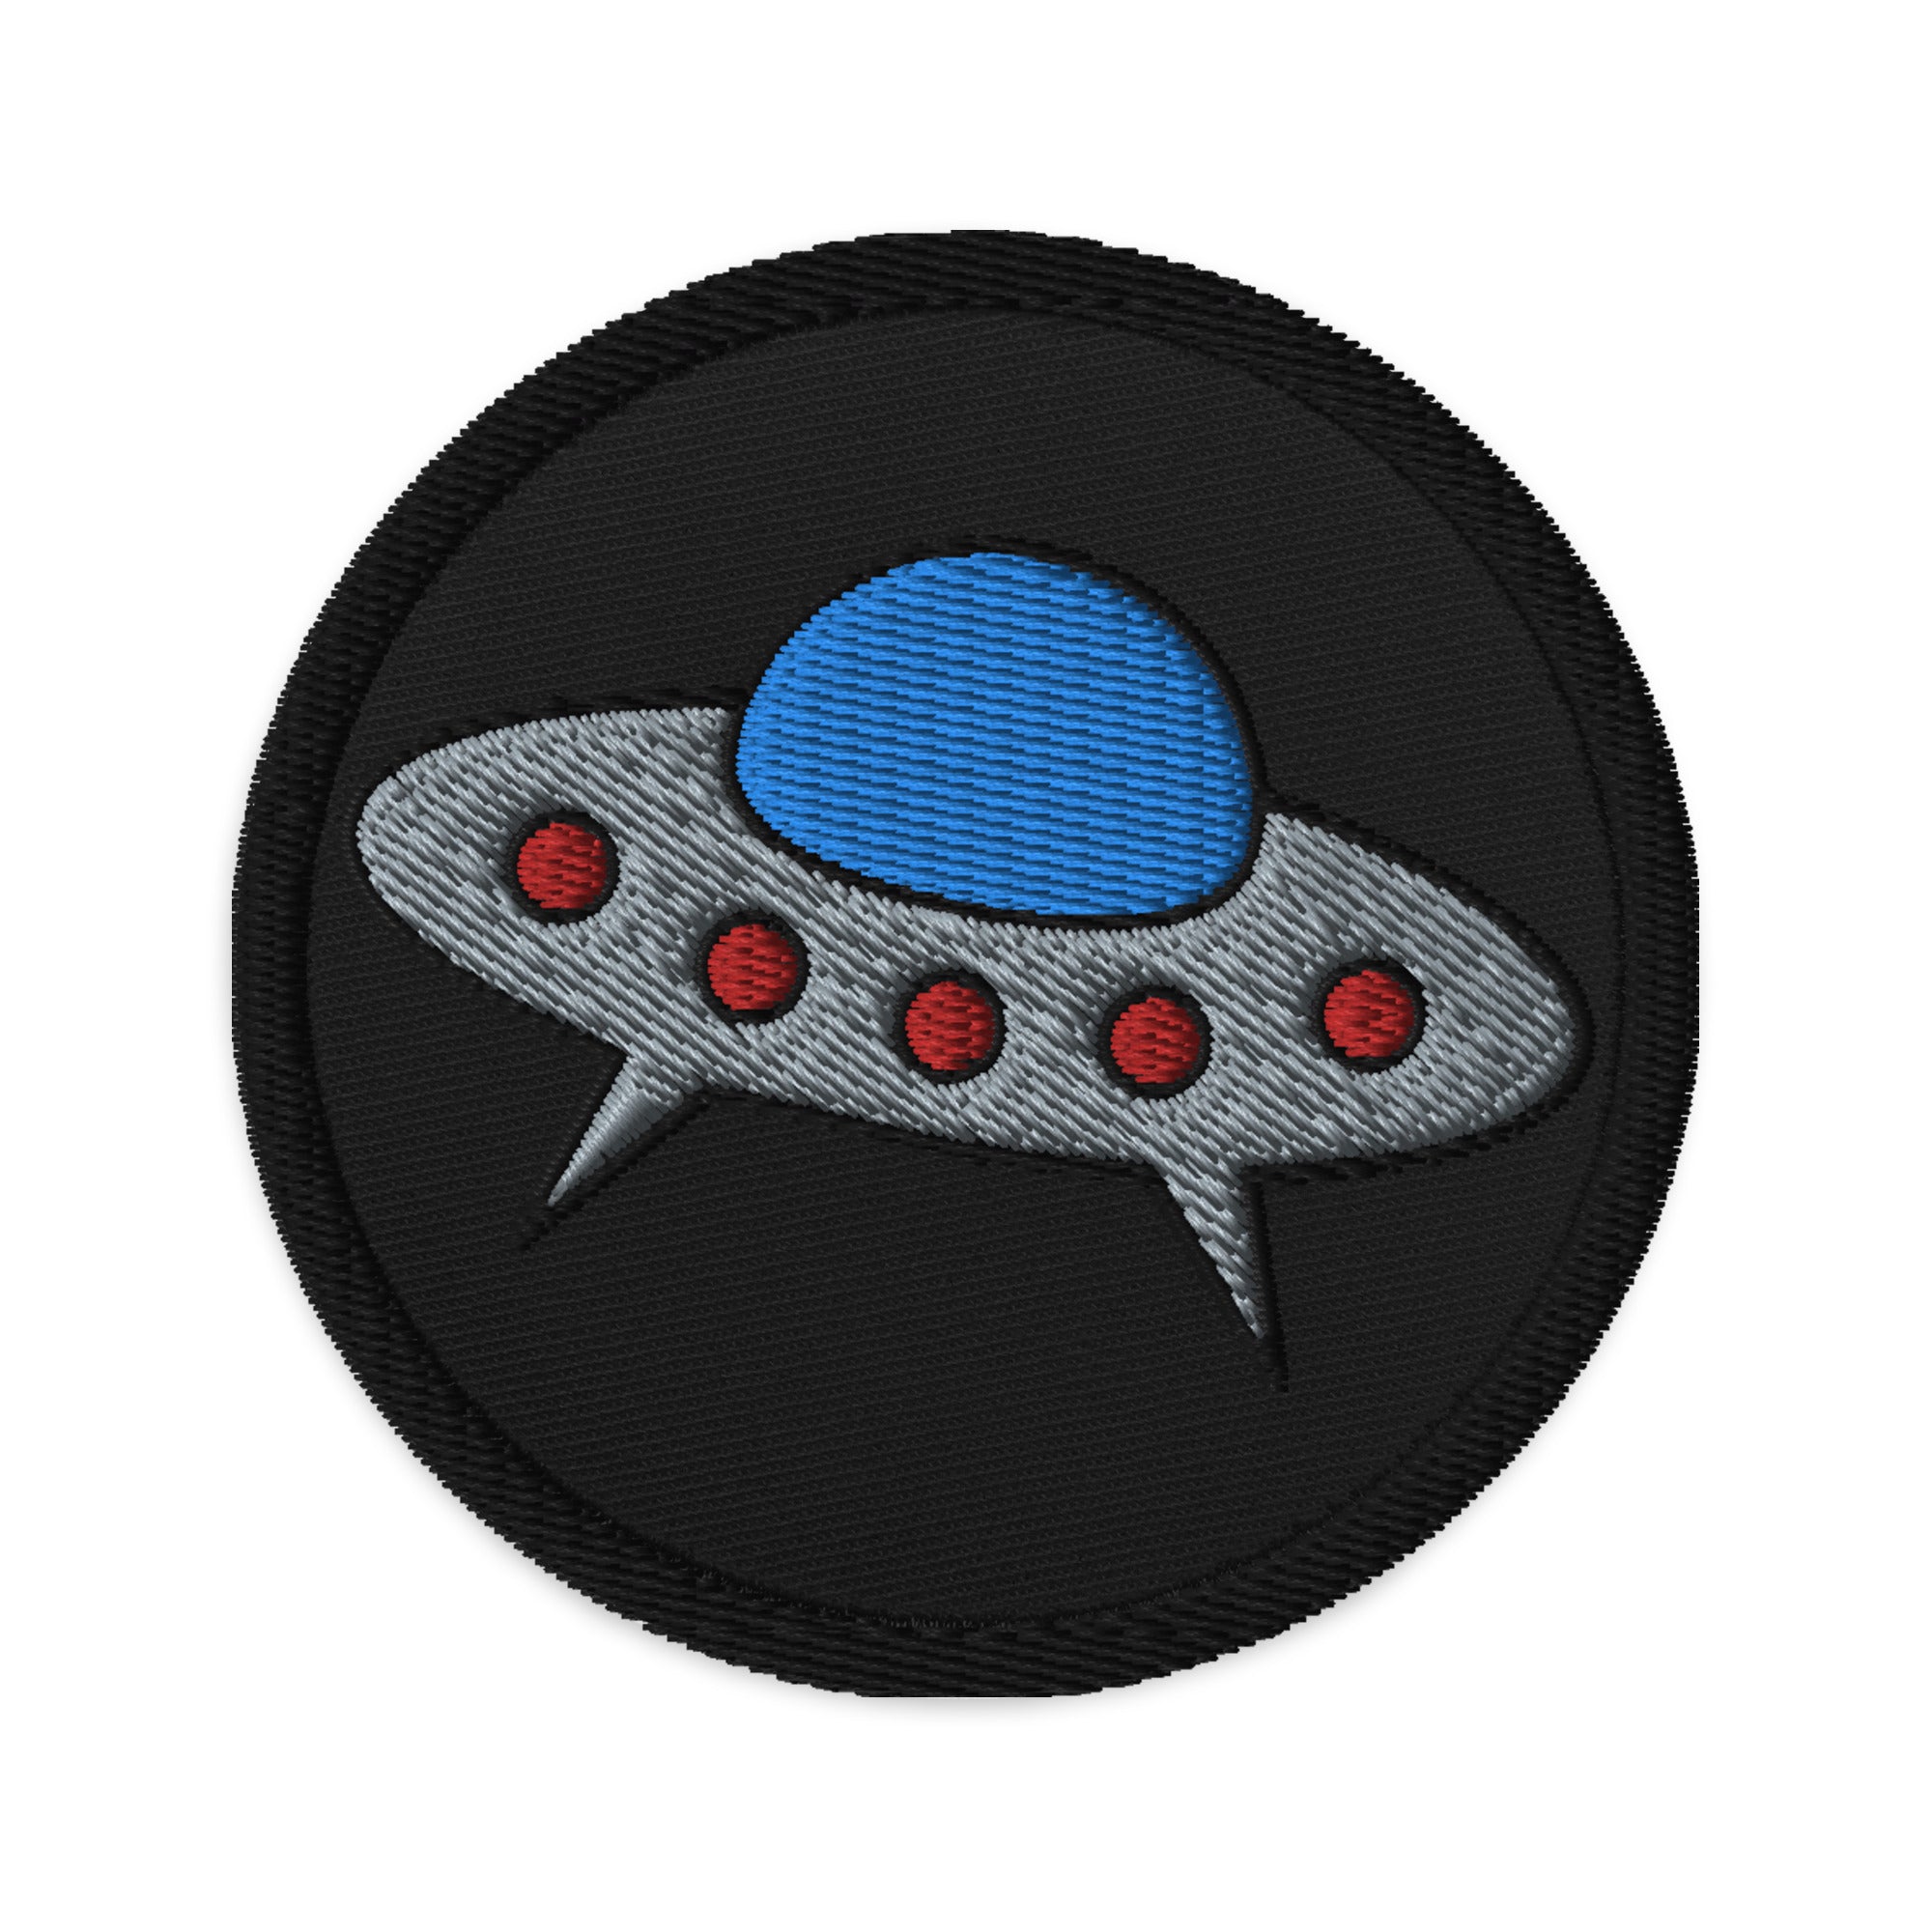 Space Alien Ship UFO Flying Saucer Embroidered Patch - Edge of Life Designs